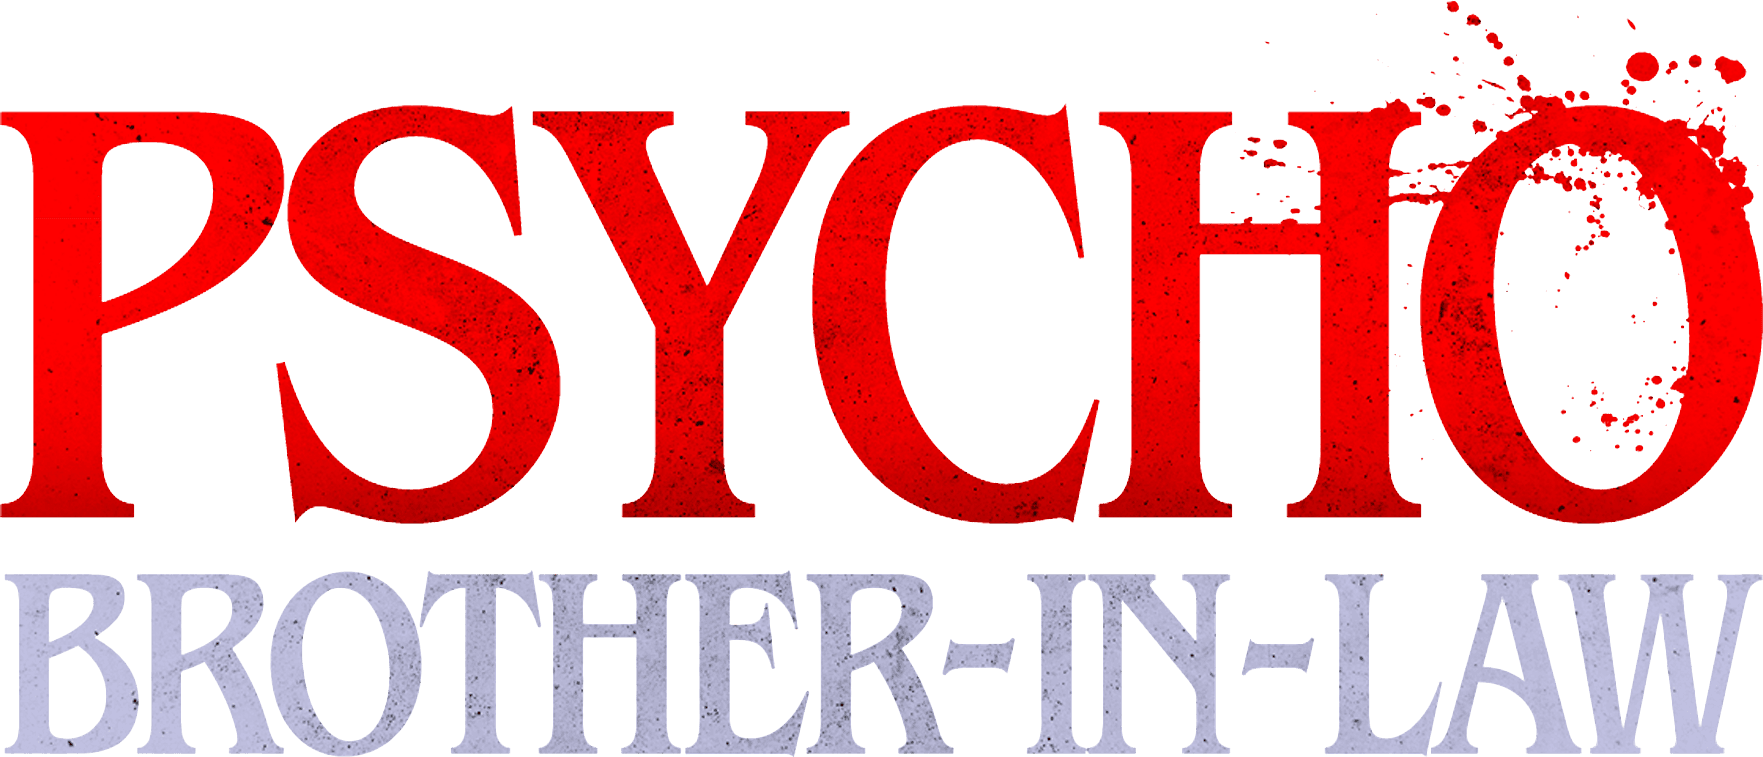 Psycho Brother-In-Law logo